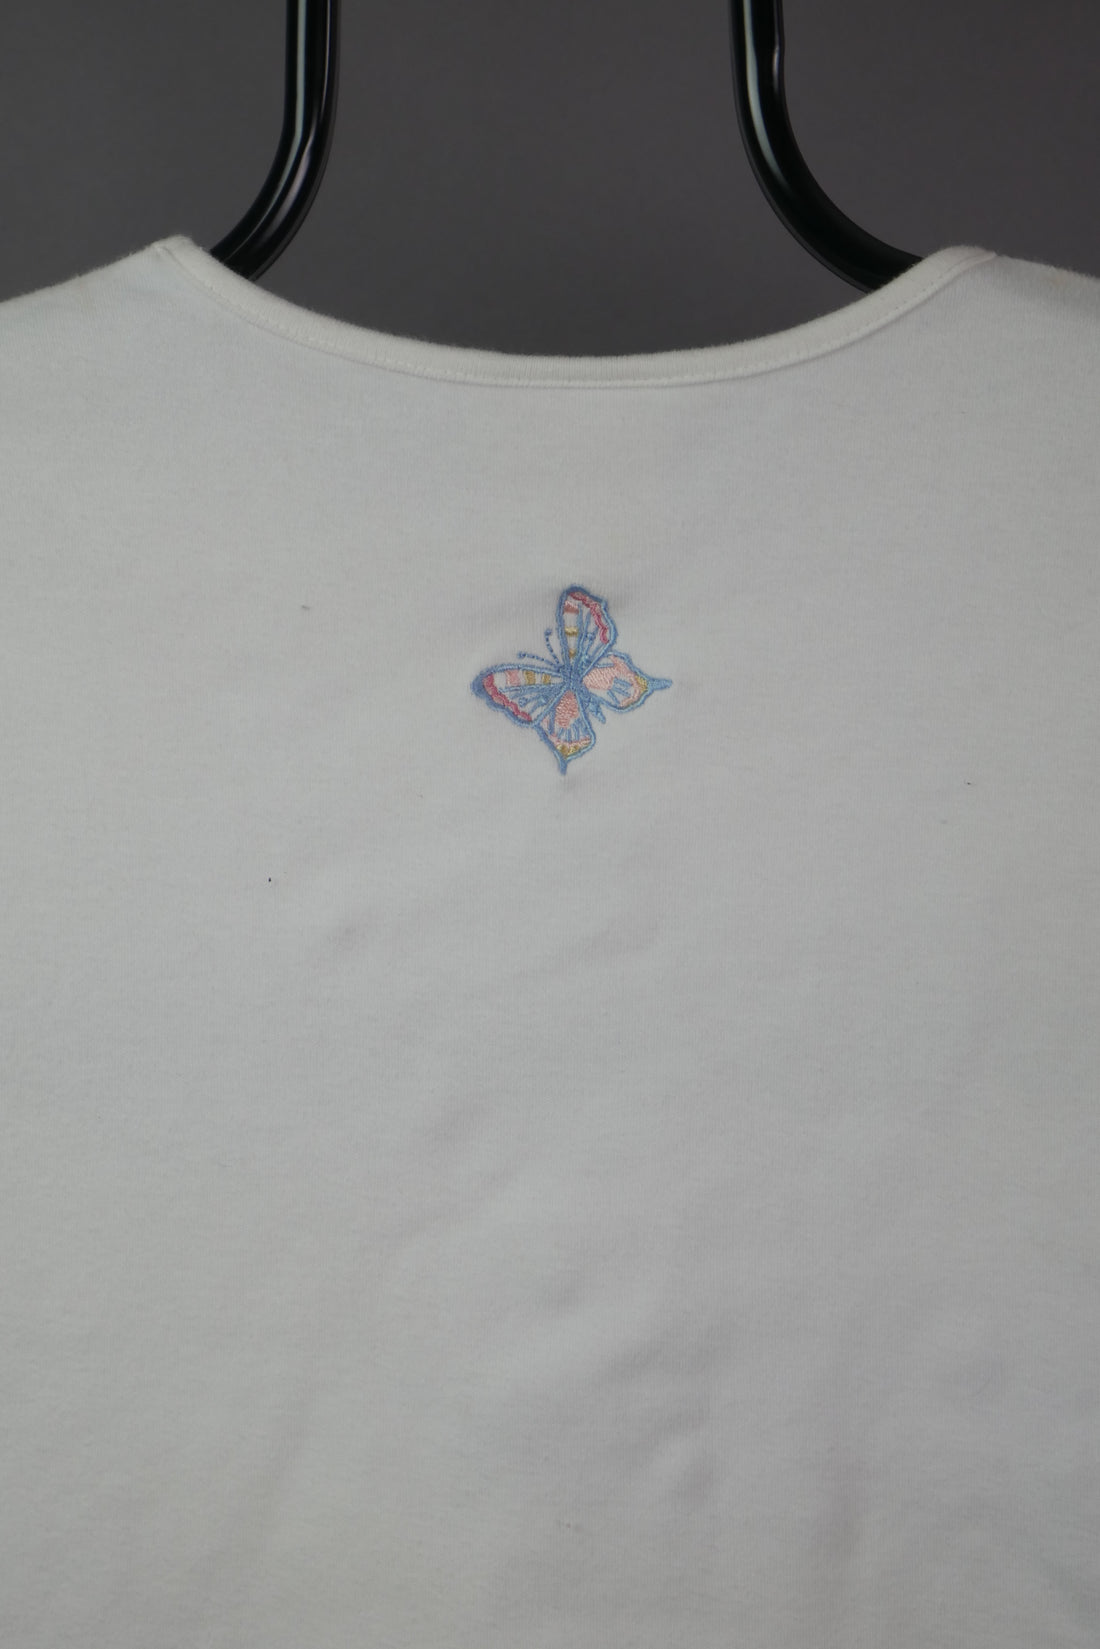 The Embroidered Butterfly T-Shirt (XS)